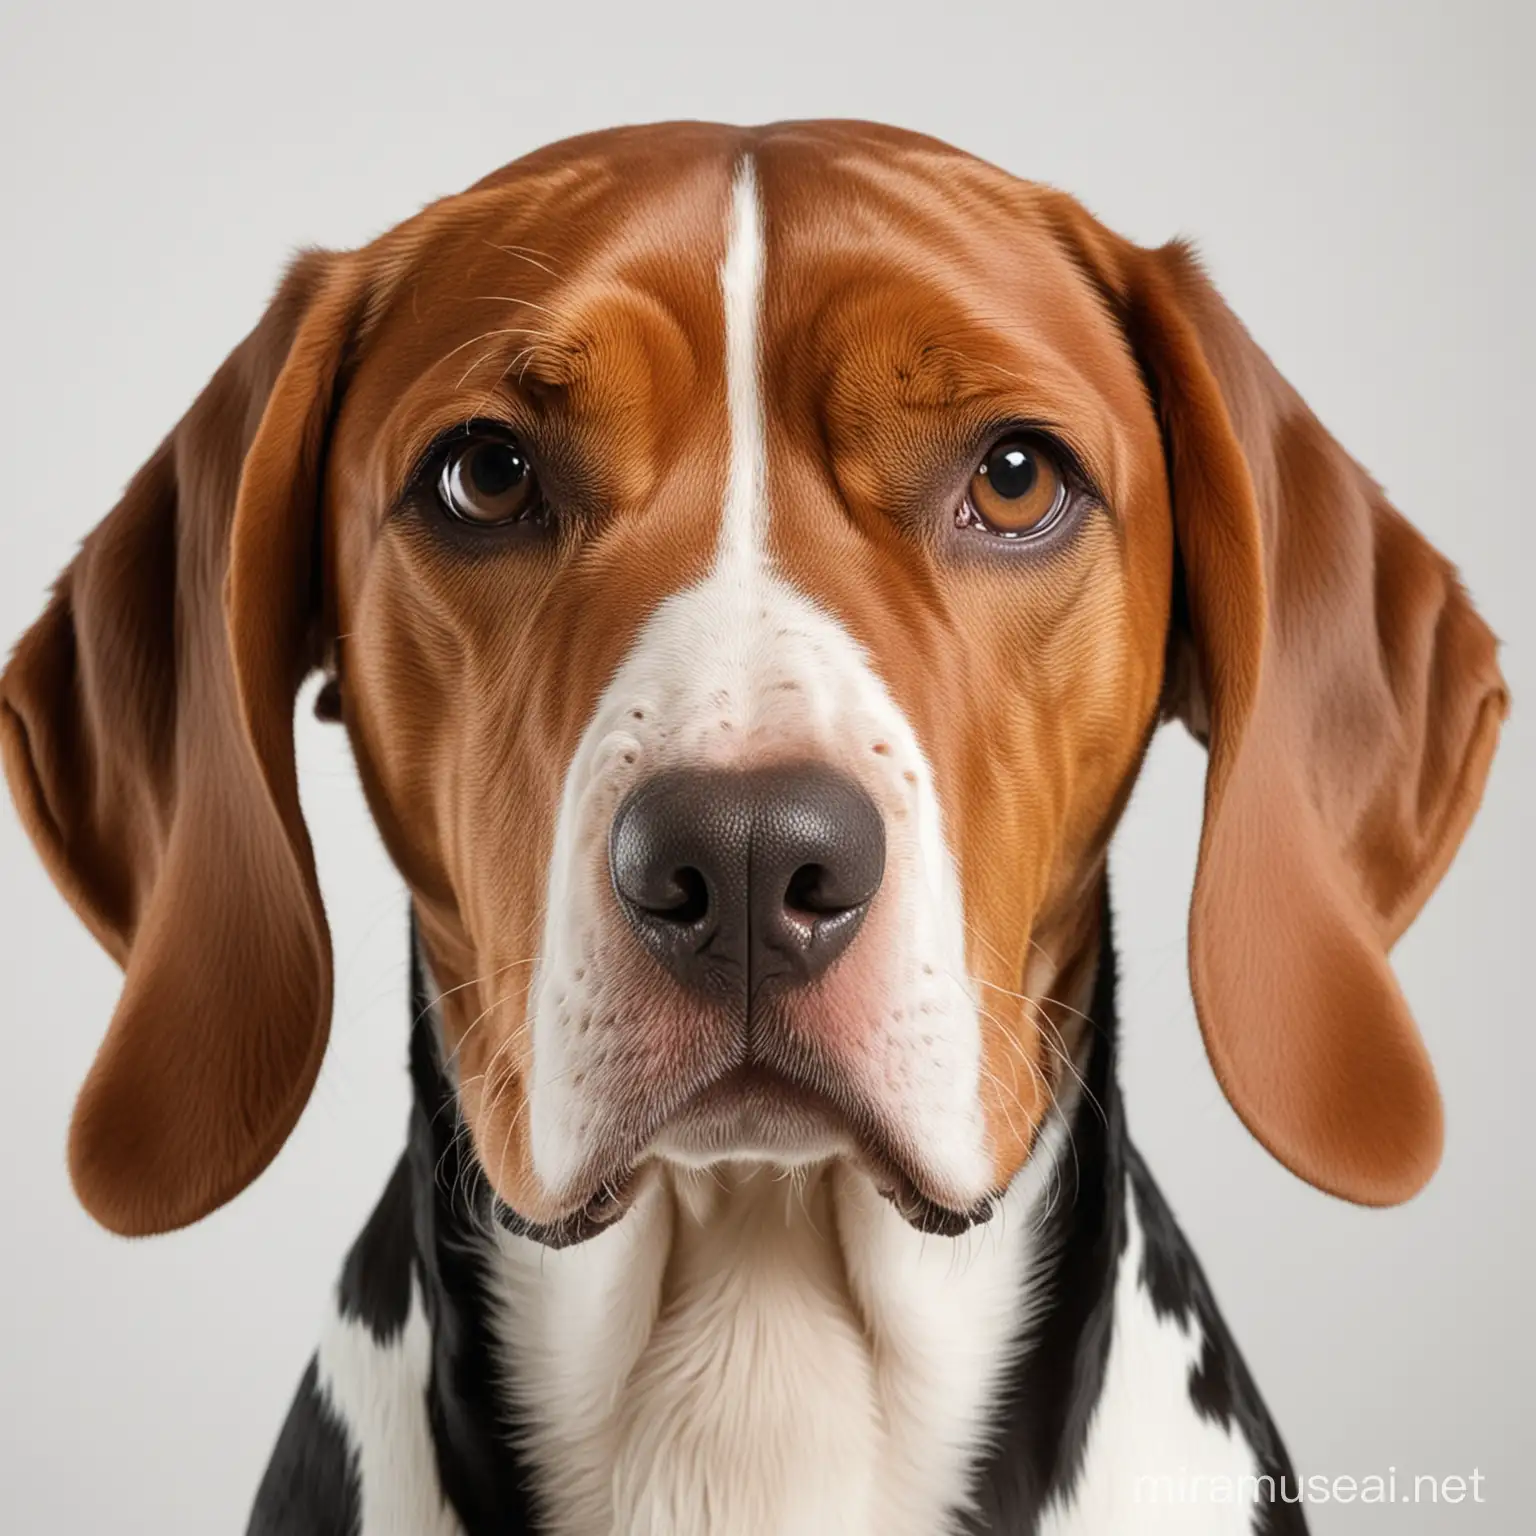 American English Coonhound face white background
